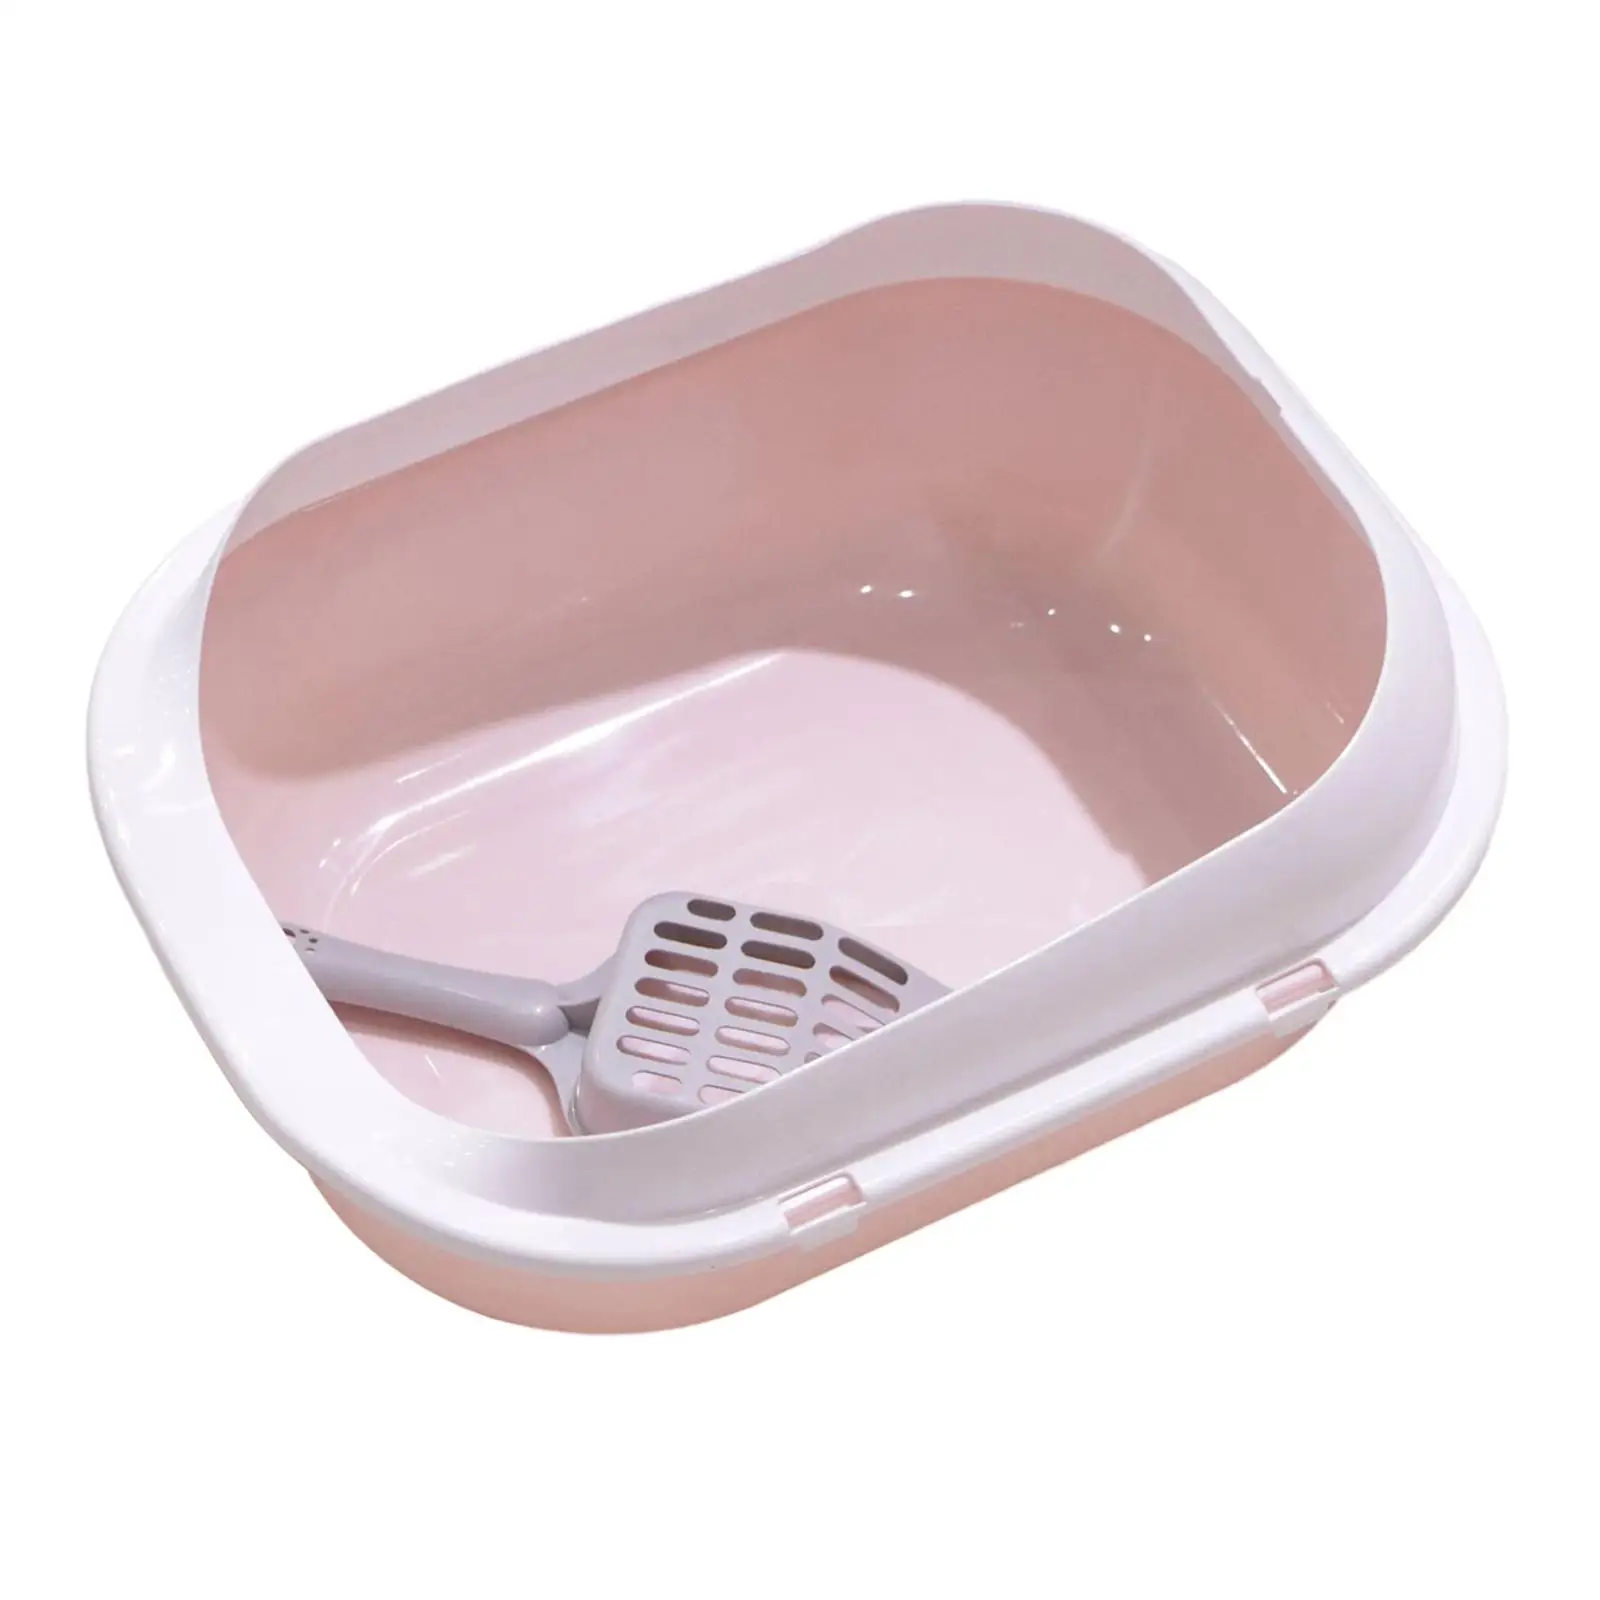 Kitten Potty Toilet Open Top Pet Litter Tray Large Space Bedpan Cat Litter Tray for Kittens Small Animals Indoor Cats Rabbit Dog